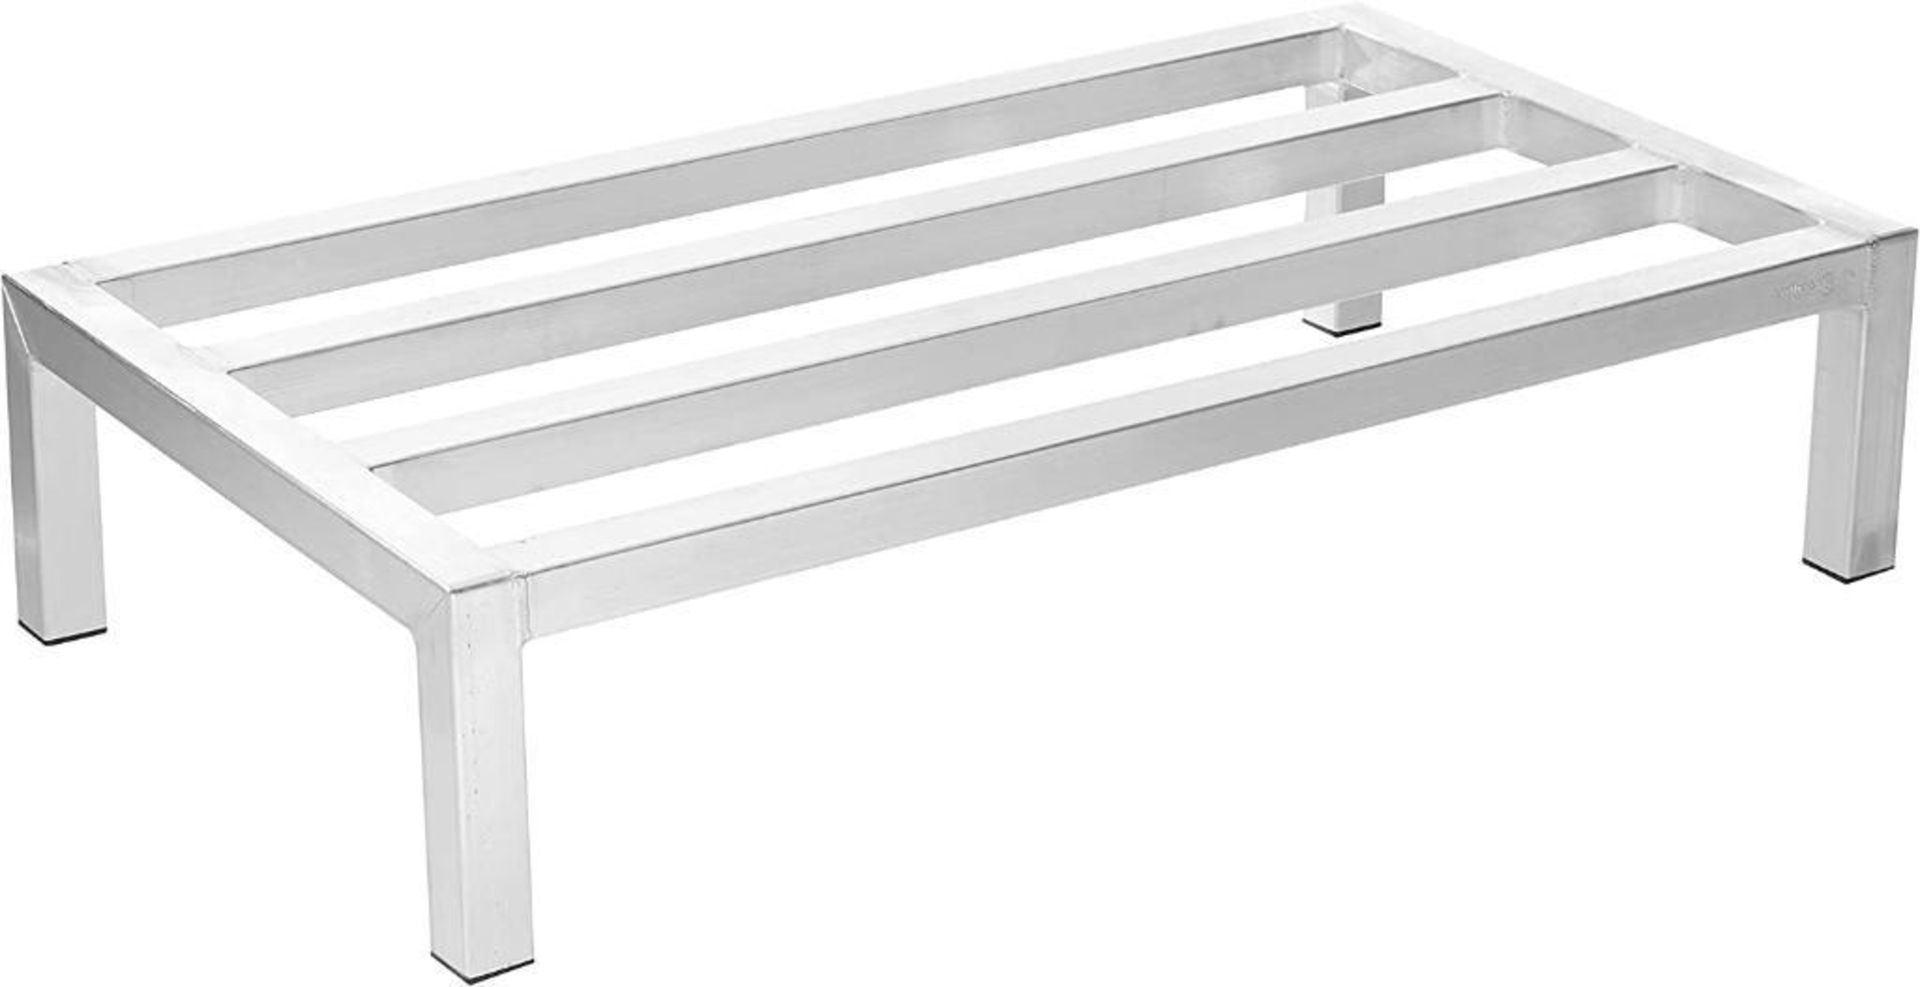 DESCRIPTION: 48" X 20" ALUMINUM DUNNAGE RACK. ADDITIONAL INFORMATION CONTENTS ARE NOT INCLUDED SIZE